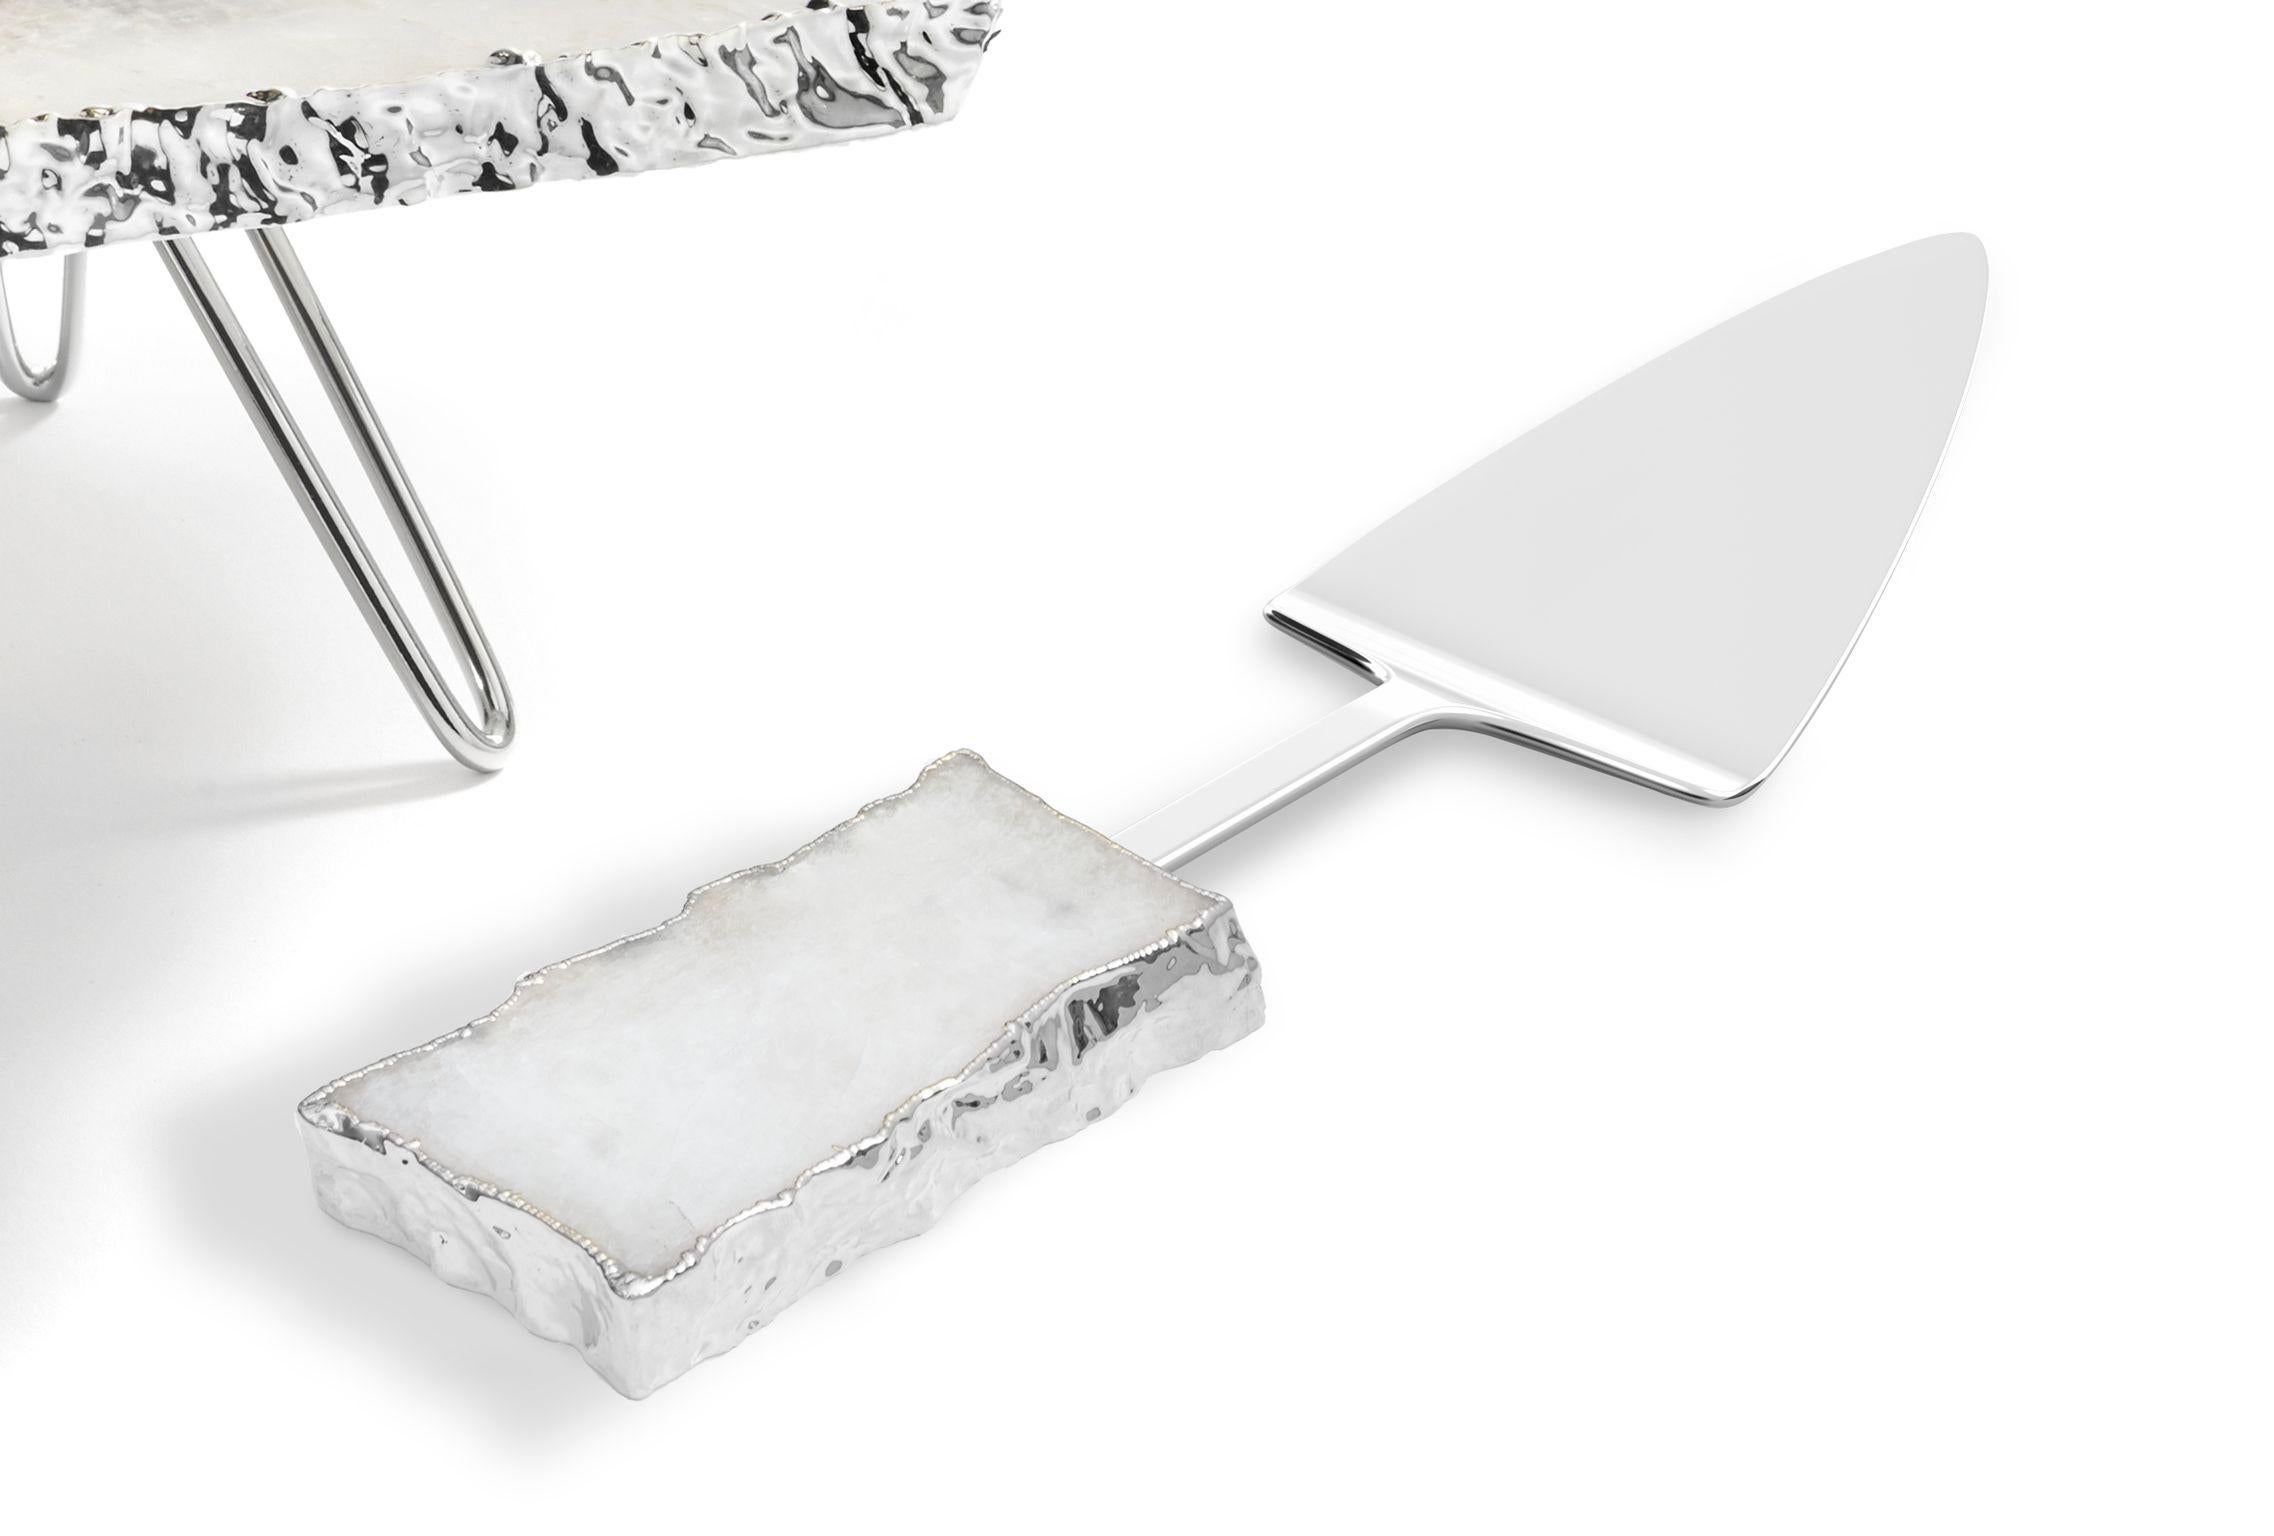 Indian Torta Cake Server in Crystal and Silver by ANNA new york